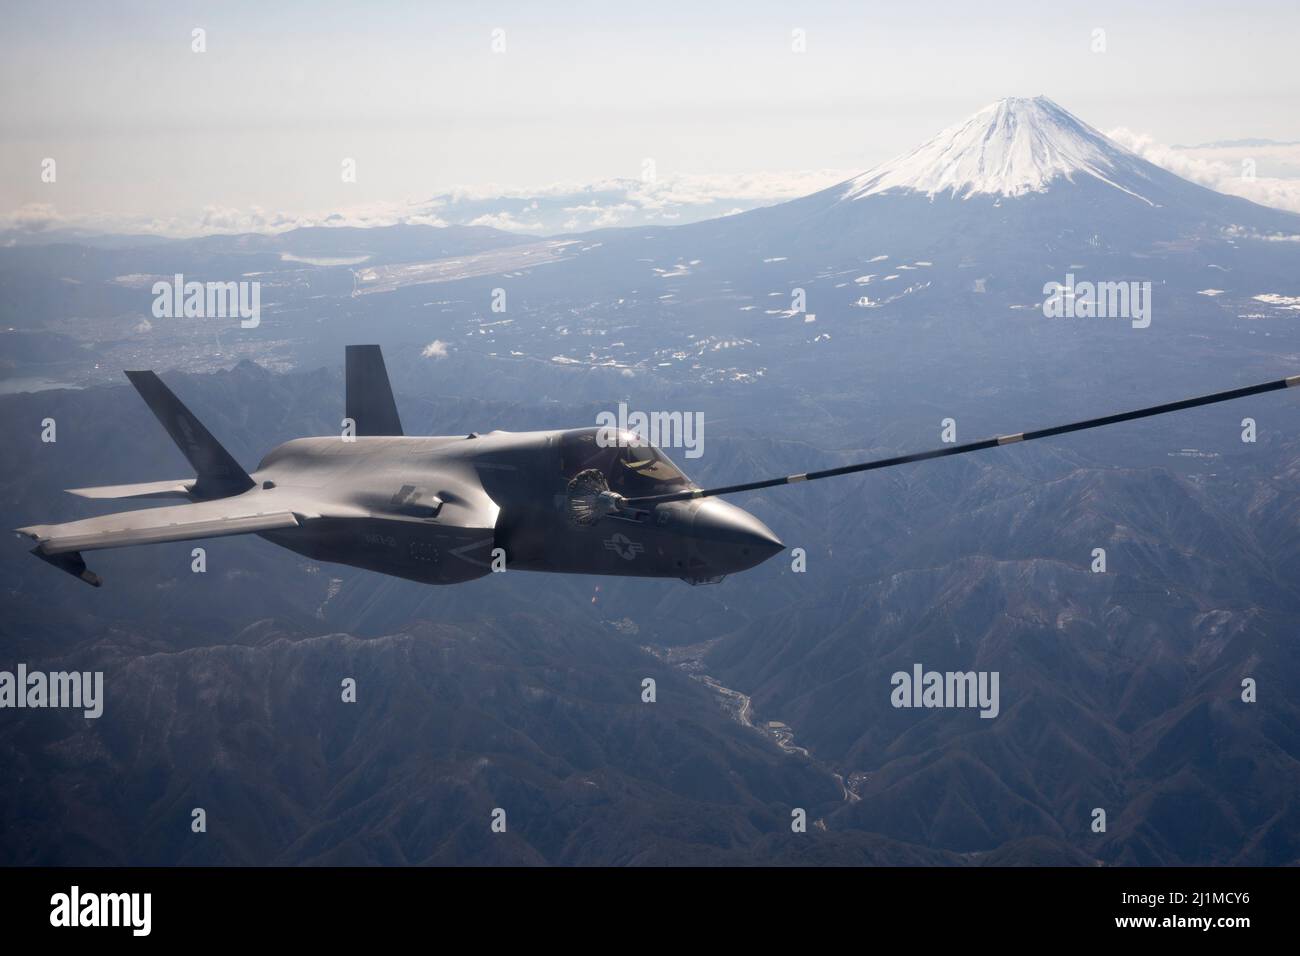 A U.S. Marine Corps F-35B Lightning II with Marine Fighter Attack Squadron (VMFA) 121 conducts aerial refueling with Marine Aerial Refueler Transport Squadron (VMGR) 152 near Mt. Fuji, Japan, March 24, 2022. Marines with VMGR-152 supported Marines with VMFA-121 during a training flight simulating close air support at Camp Fuji, Japan. Marine Corps aviation routinely conducts training throughout the region to remain combat-ready in support of a free and open Indo-Pacific and to demonstrate our commitment to the Treaty of Mutual Cooperation and Security between the U.S. and Japan. (U.S. Marine C Stock Photo